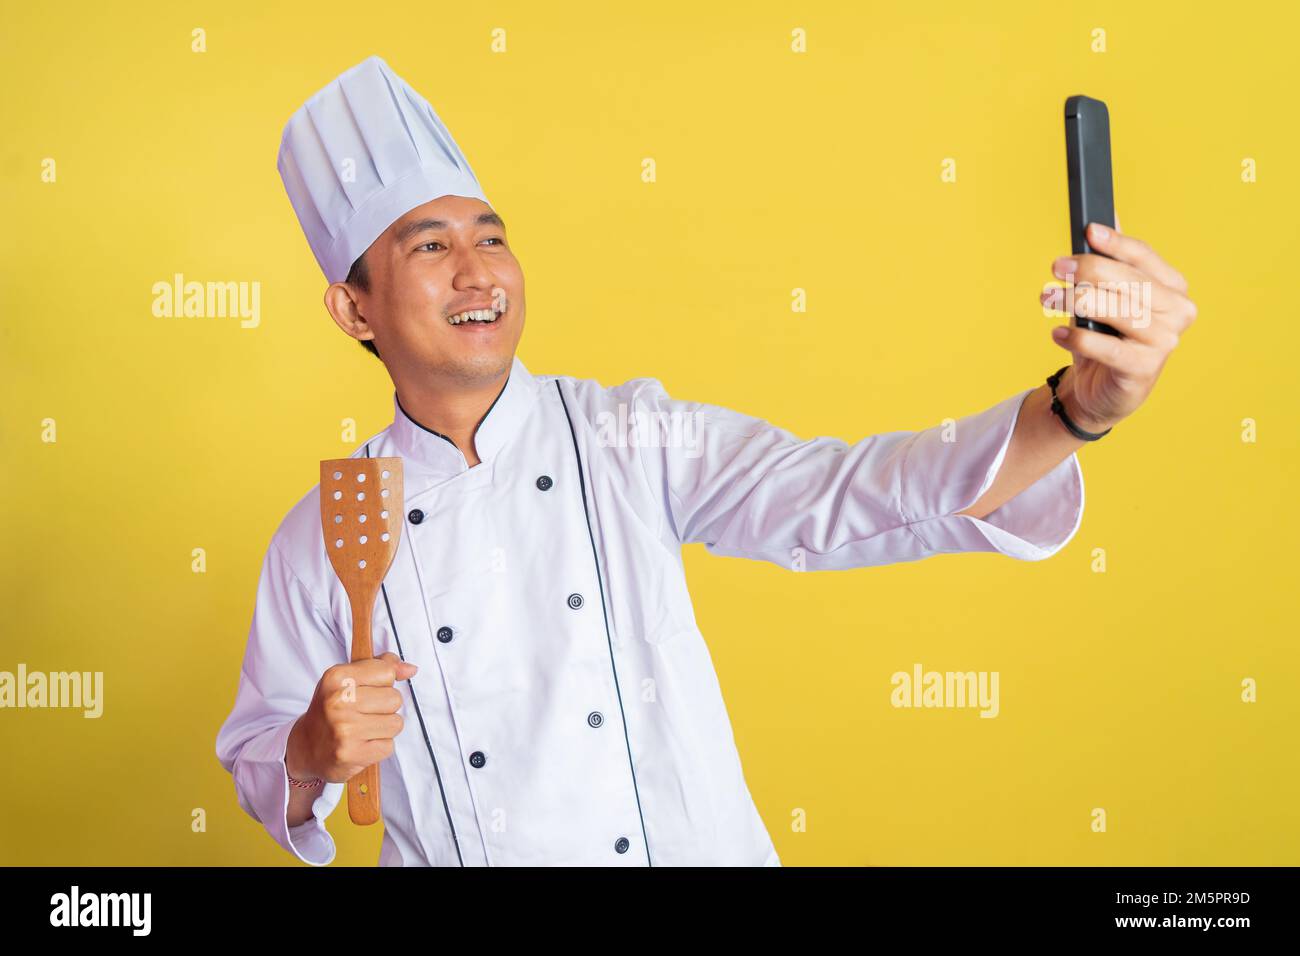 asian male chef wearing chef jacket selfie while holding spatula Stock Photo